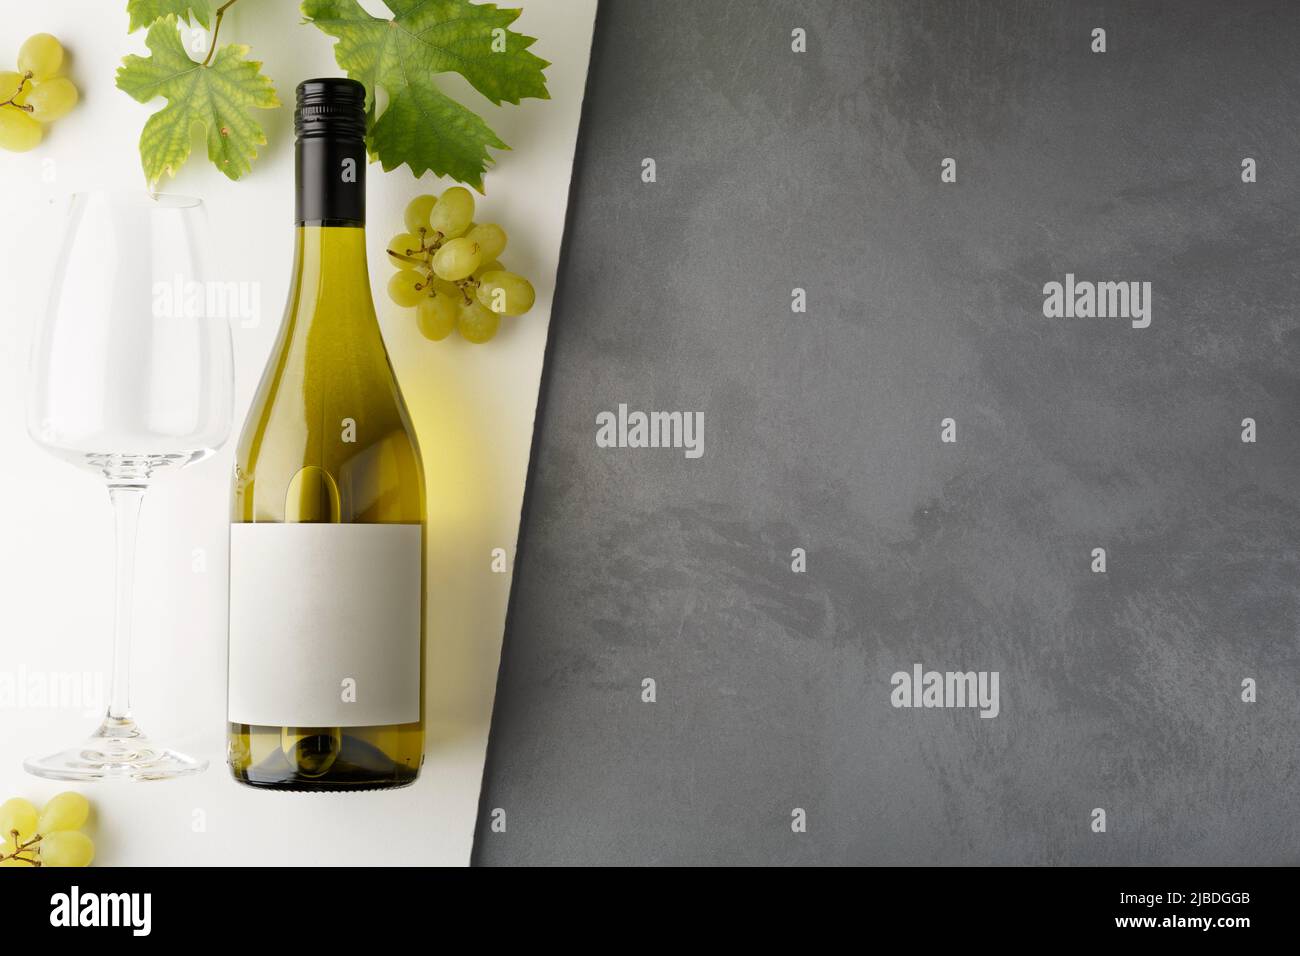 Bottle of white wine with label. Glass of wine and grape. Wine bottle mockup. Top view. Stock Photo